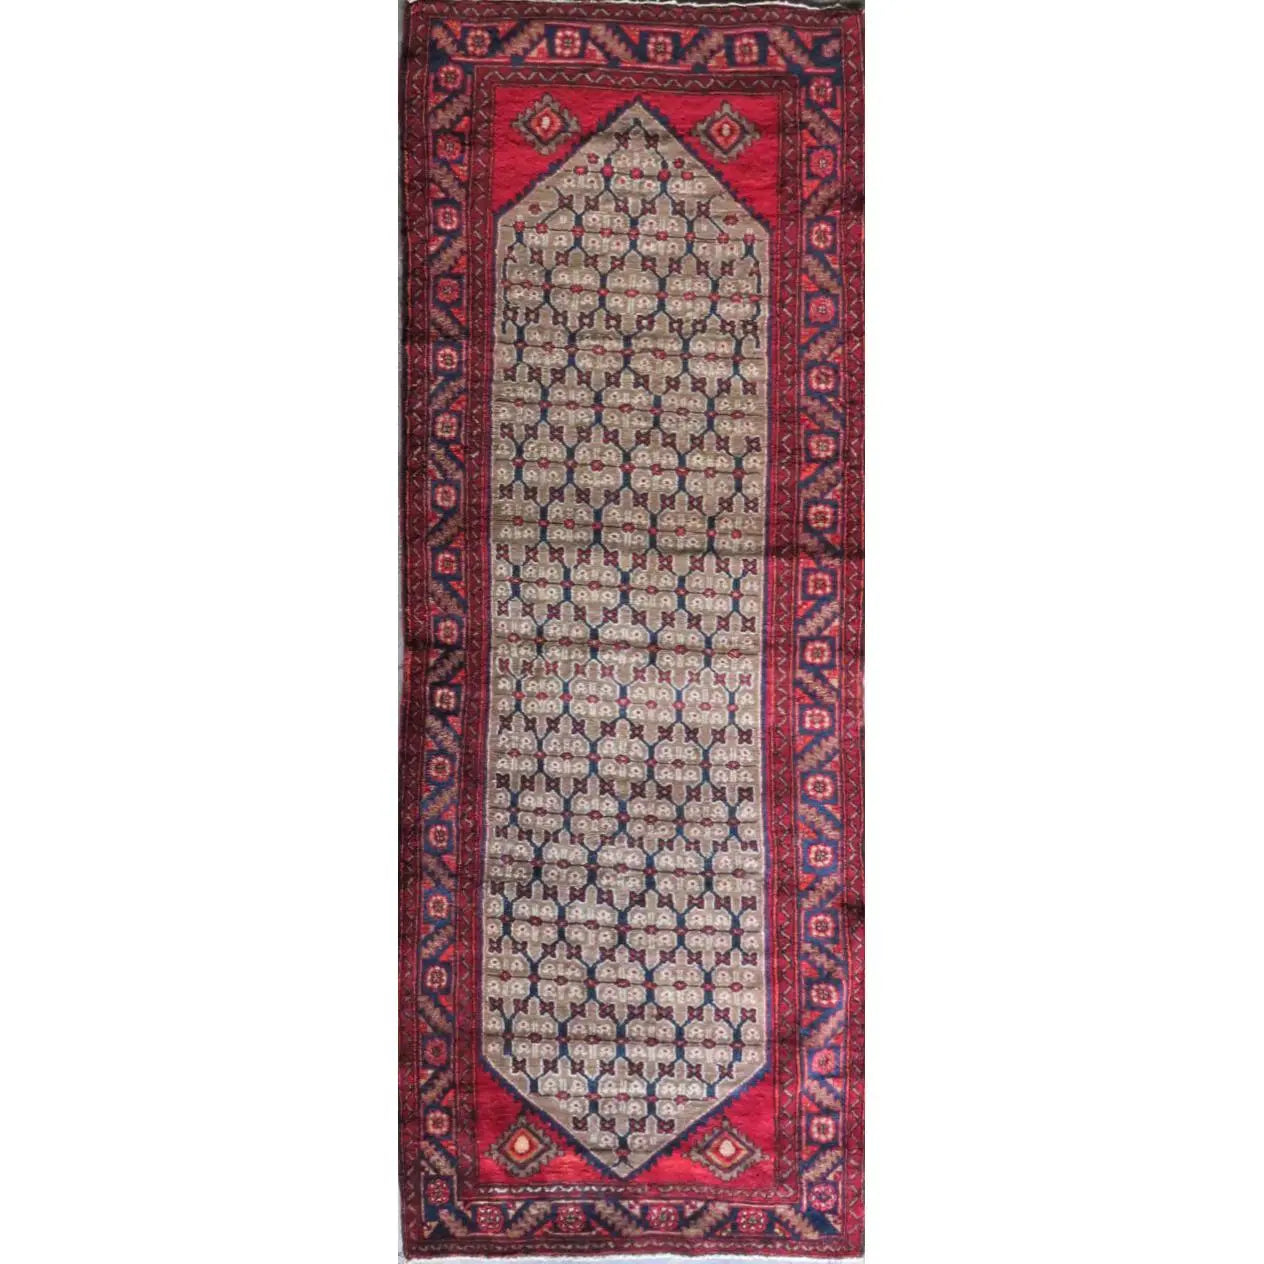 Hand-Knotted Persian Wool Rug _ Luxurious Vintage Design, 10'6" x 3'5", Artisan Crafted